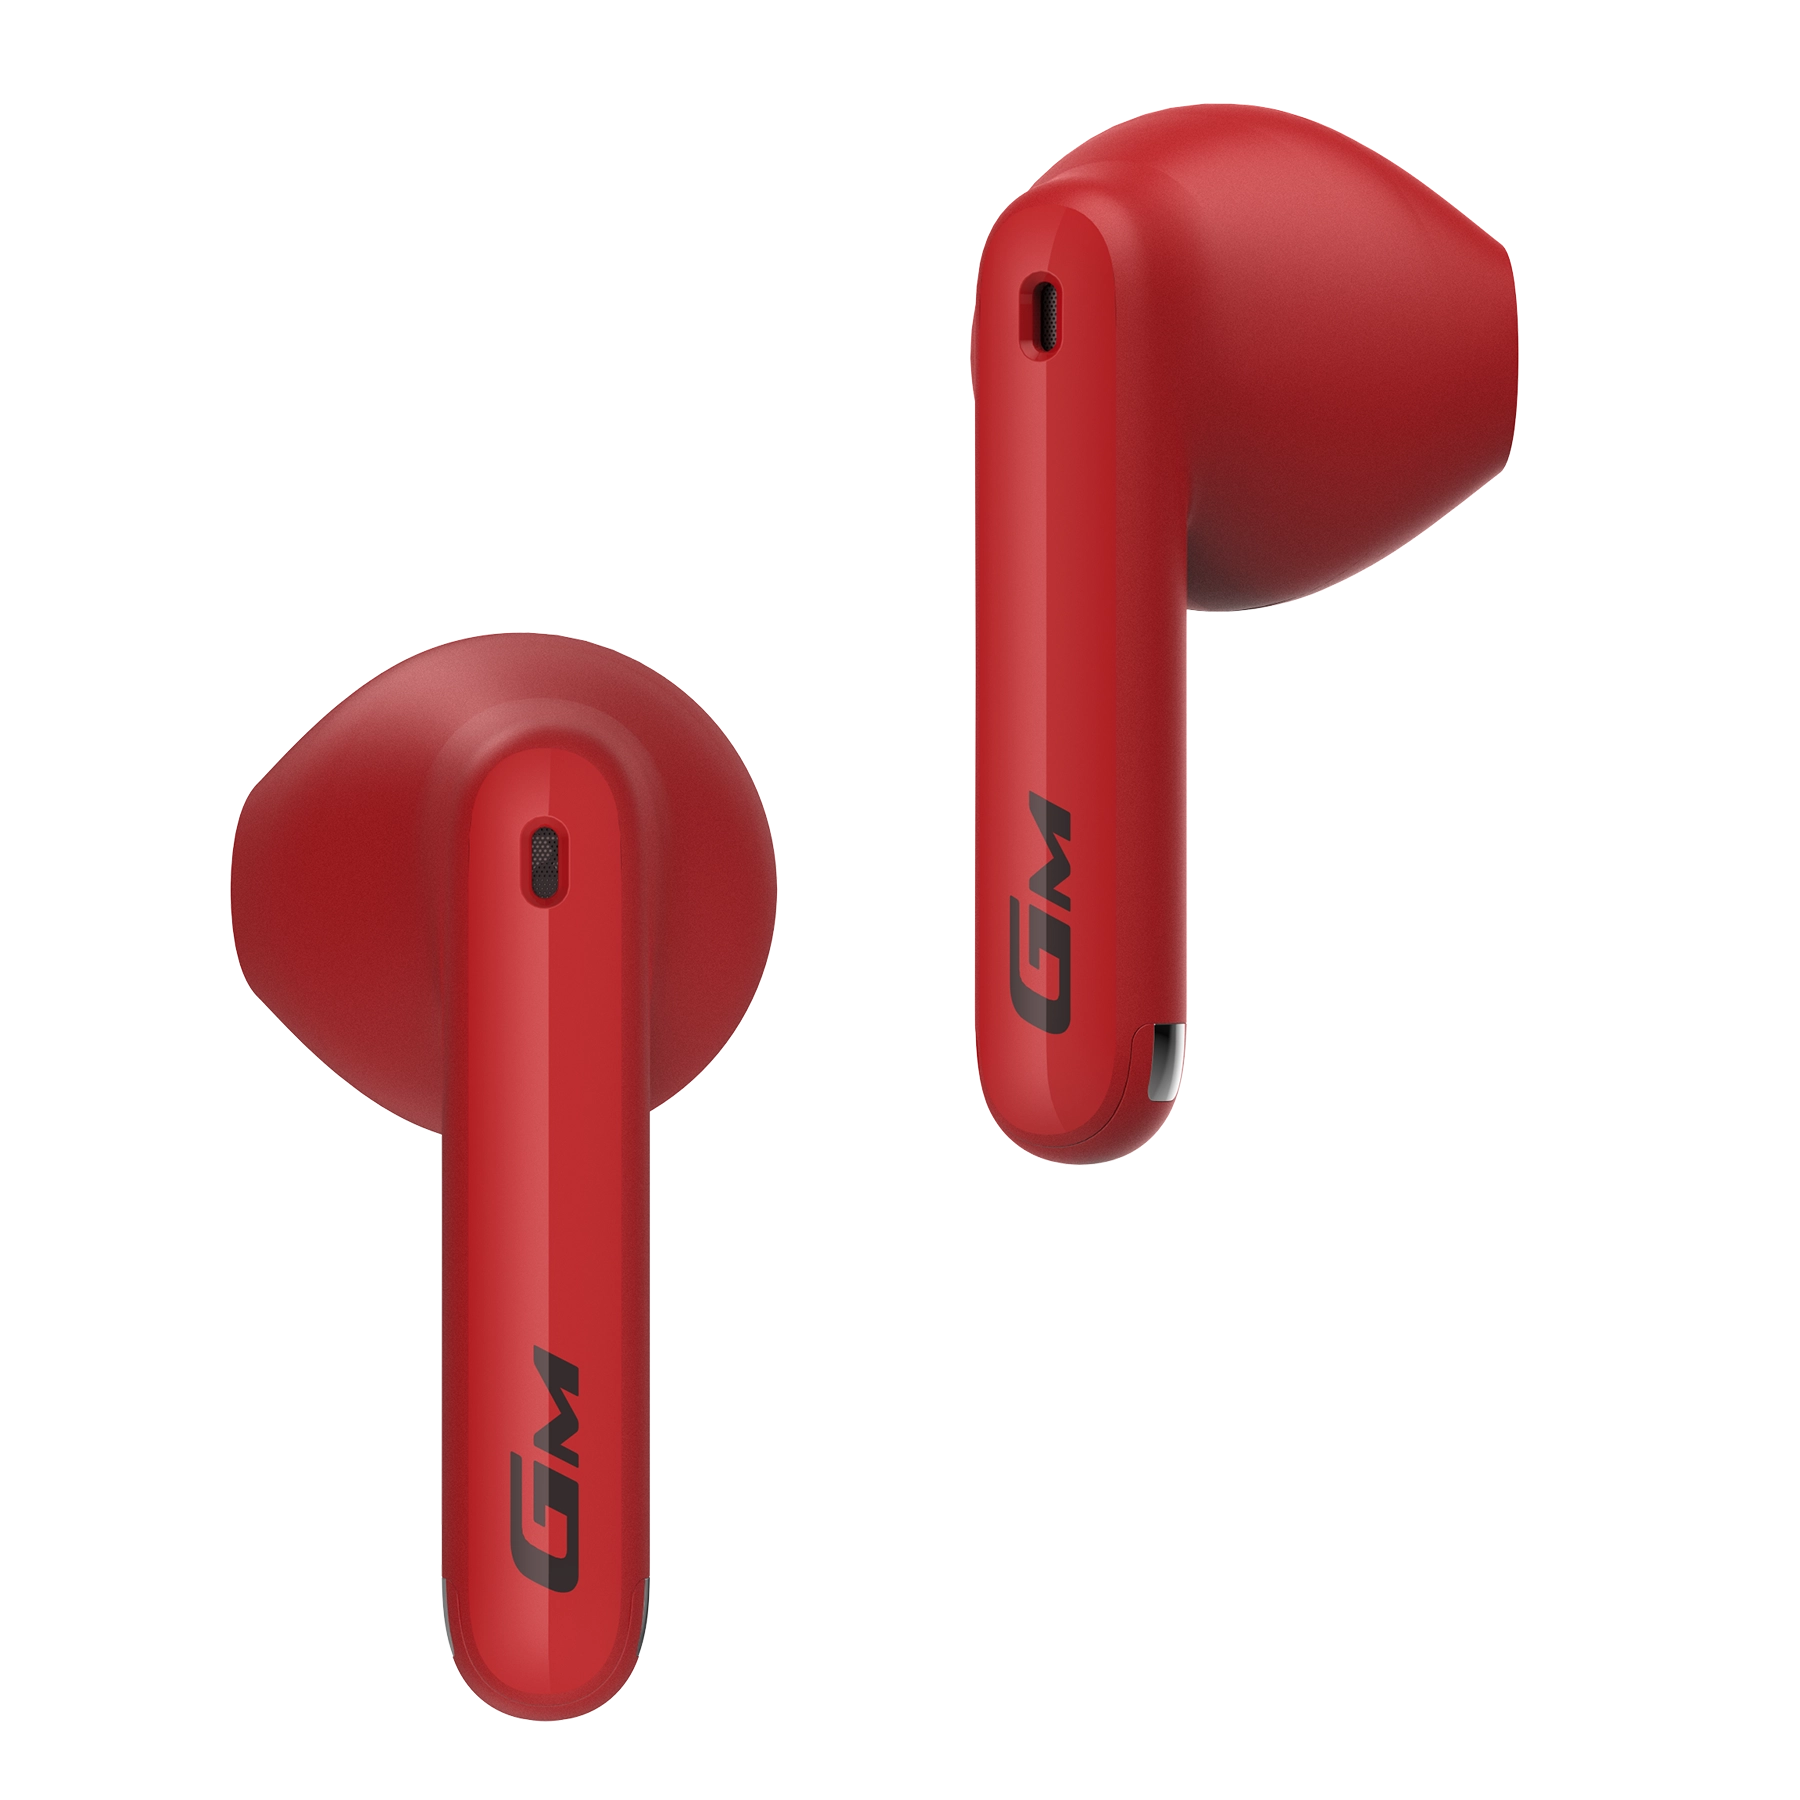 GM3 Plus Wireless Earbuds Product Pictures red_2